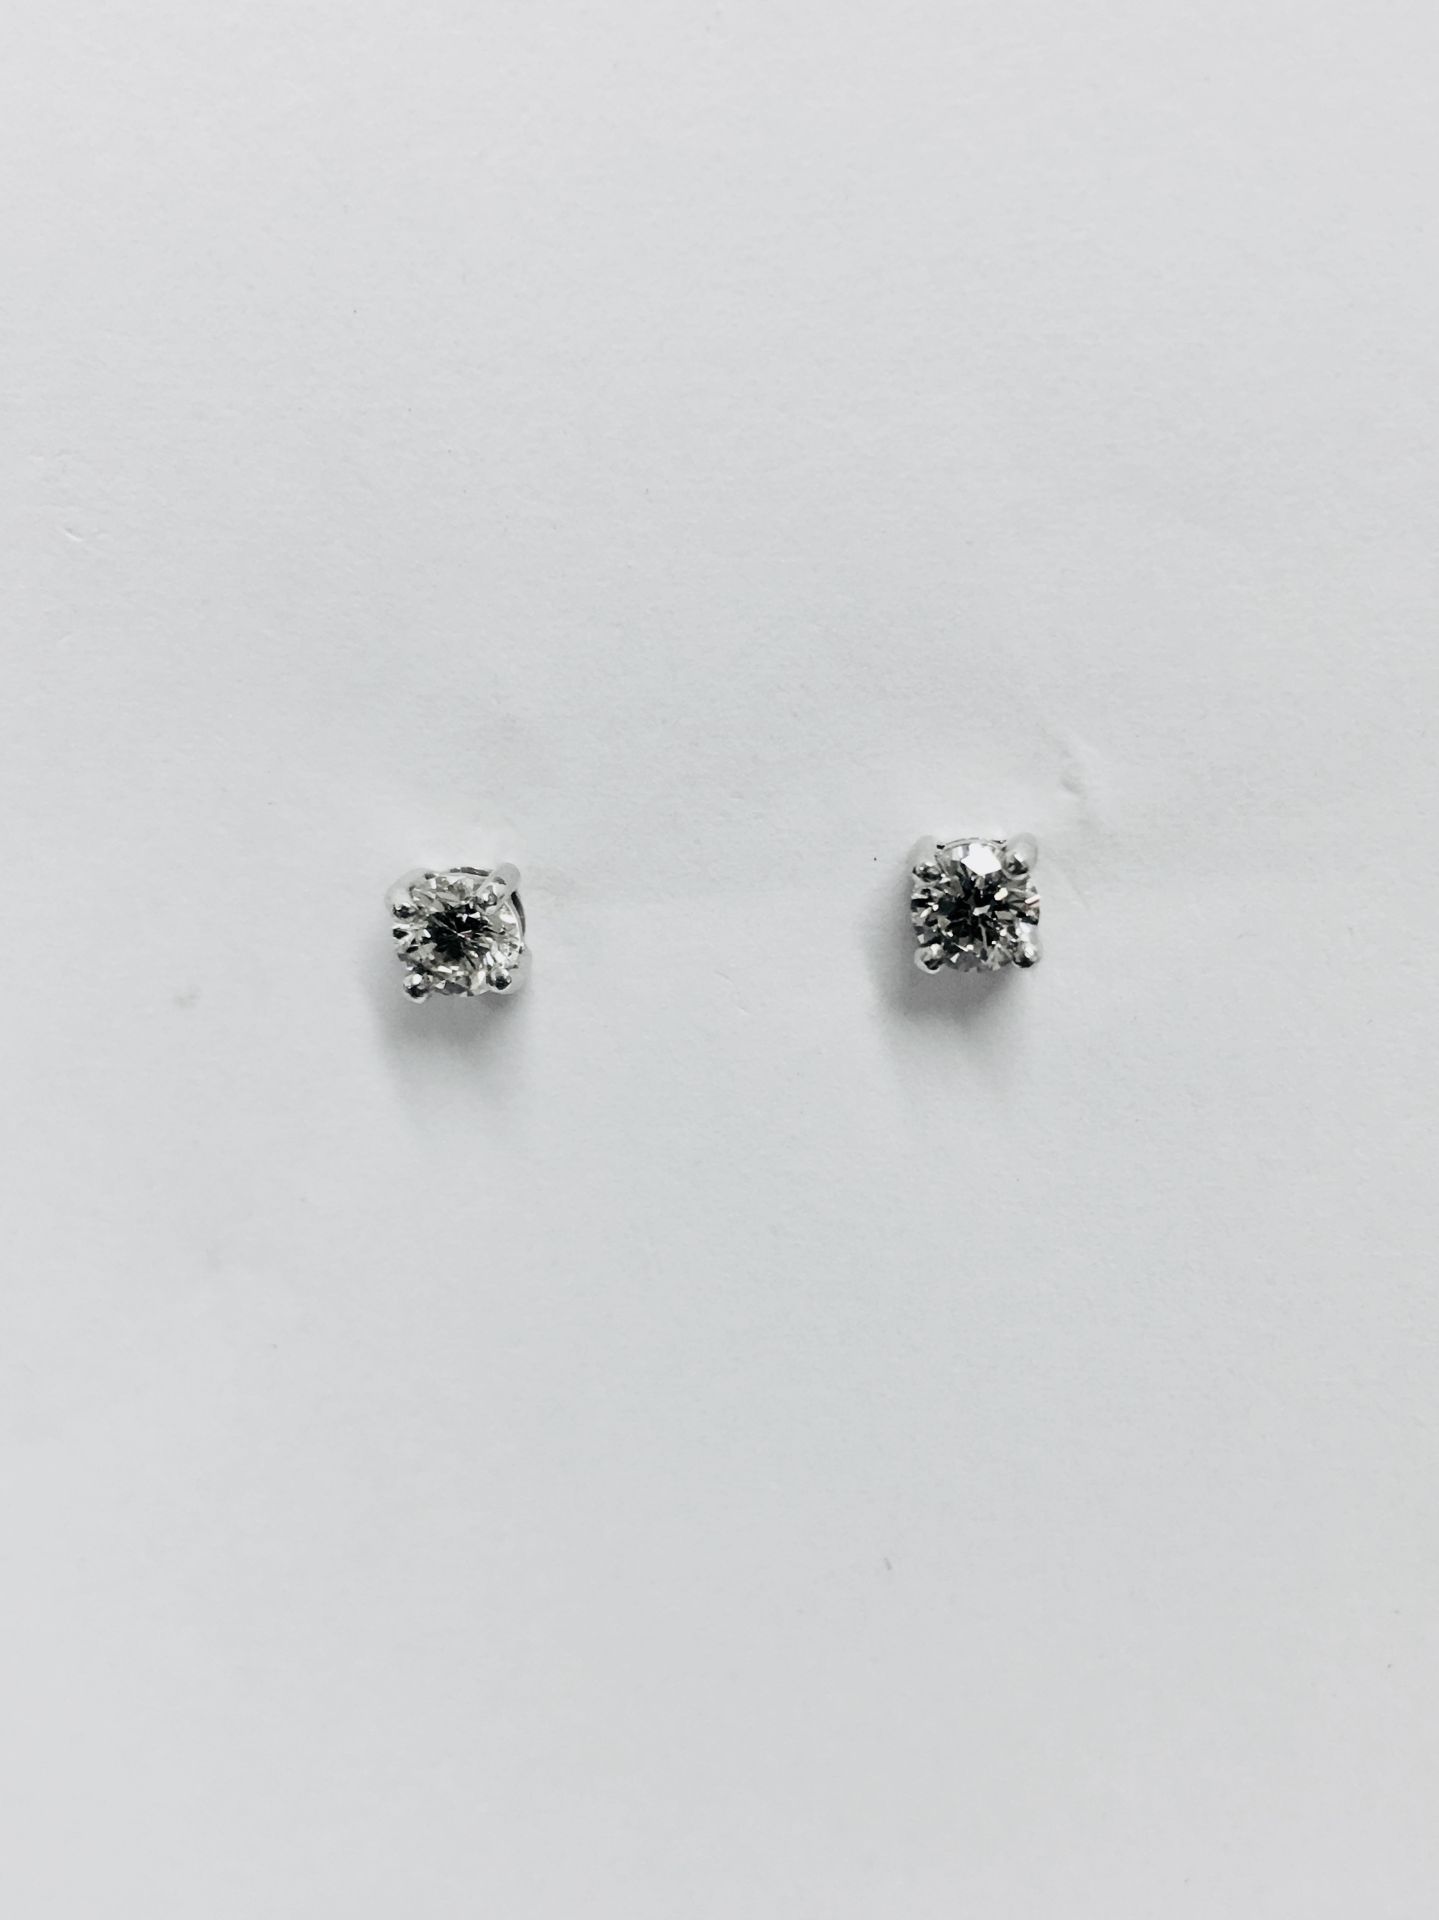 0.40ct Solitaire diamond stud earrings set with brilliant cut diamonds, SI2 clarity and I colour.